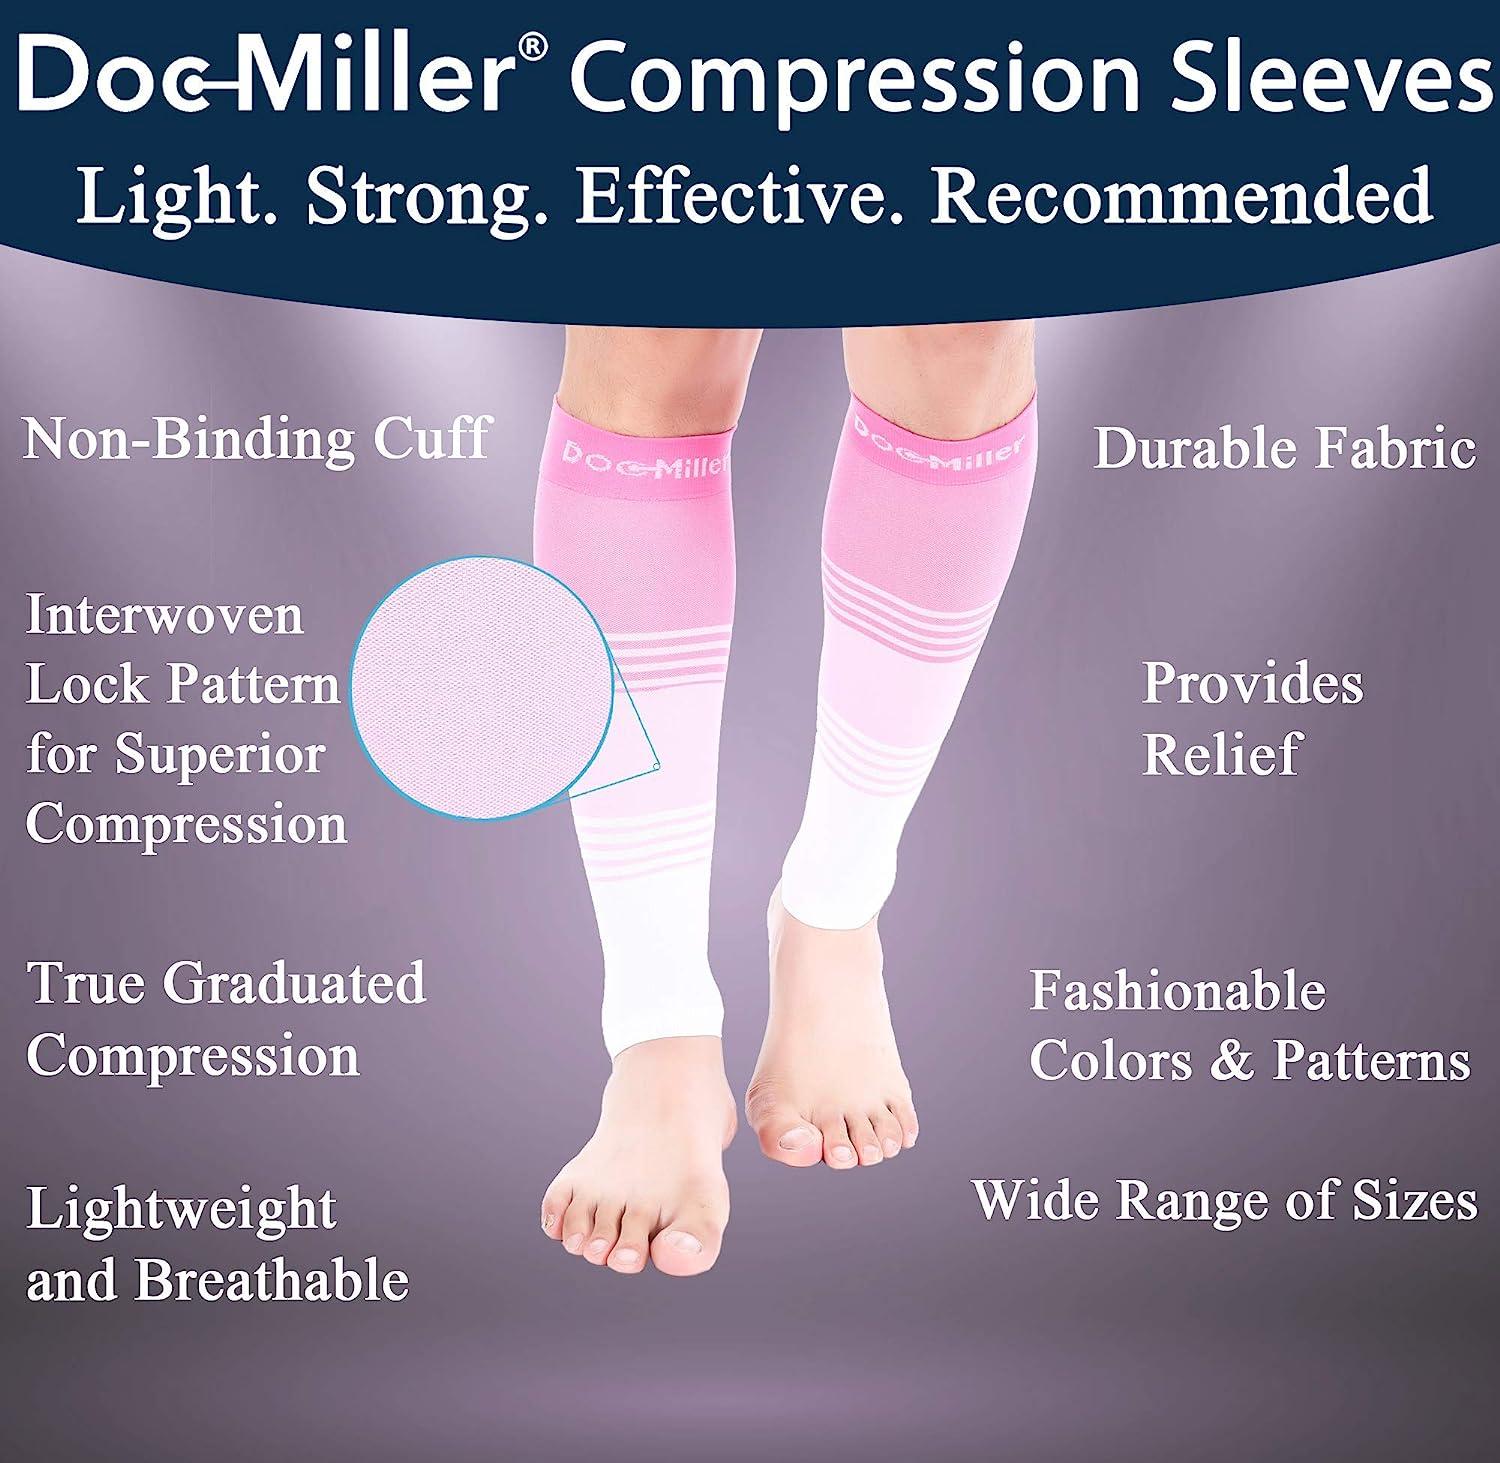 Doc Miller Calf Compression Sleeve Men and Women 20-30 mmHg, Shin Splint Compression  Sleeve, Medical Grade Socks for Varicose Veins and Maternity 1 Pair Large  Pink Pink White Calf Sleeve Pink.Pink.White Large